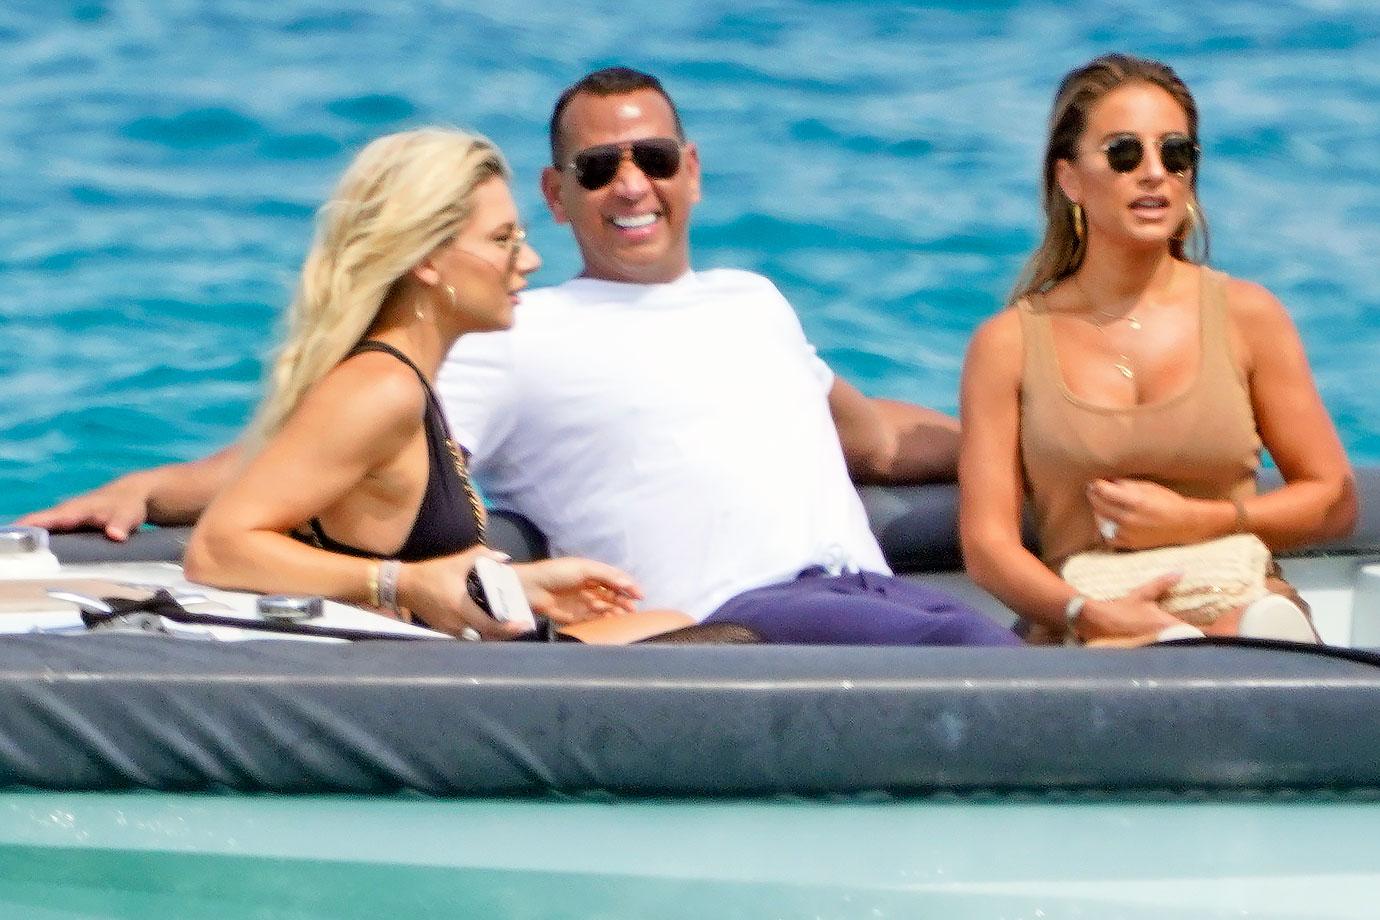 Alex Rodriguez spotted with his rumored new girlfriend Melanie